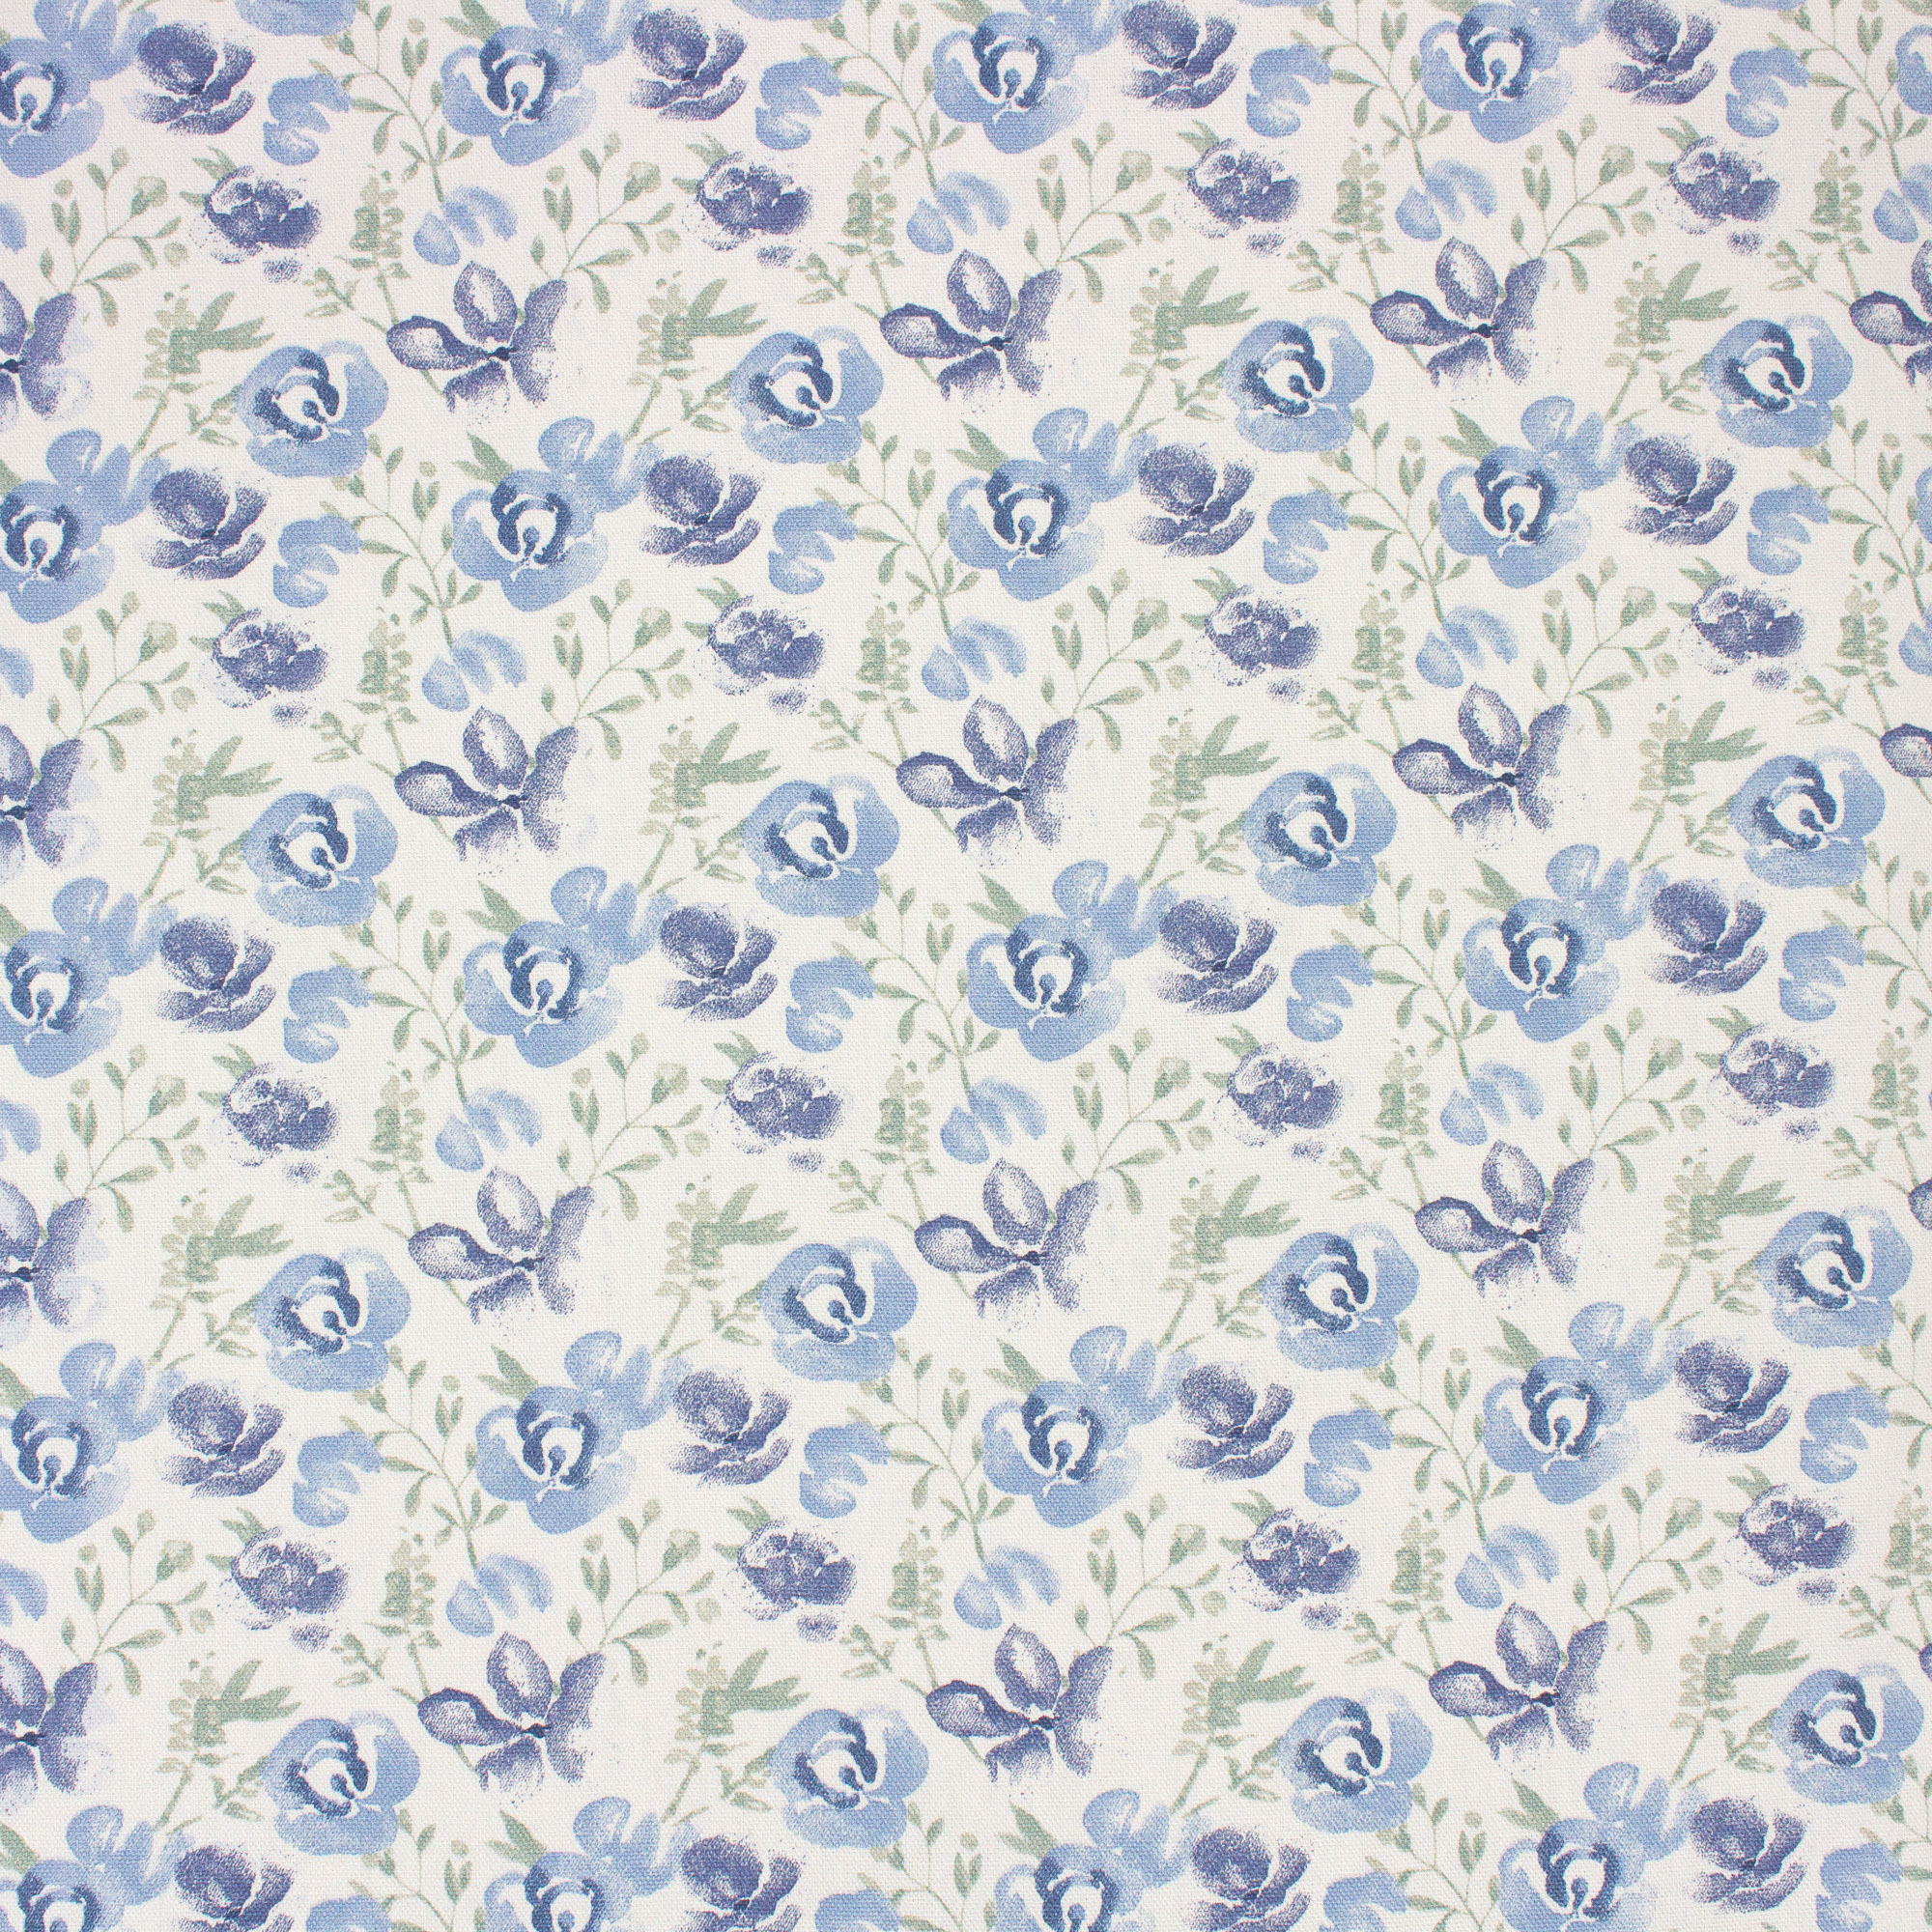 Better Homes & Gardens 100% Cotton Watercolor Floral Blue, 2 Yard Precut Fabric - image 1 of 6